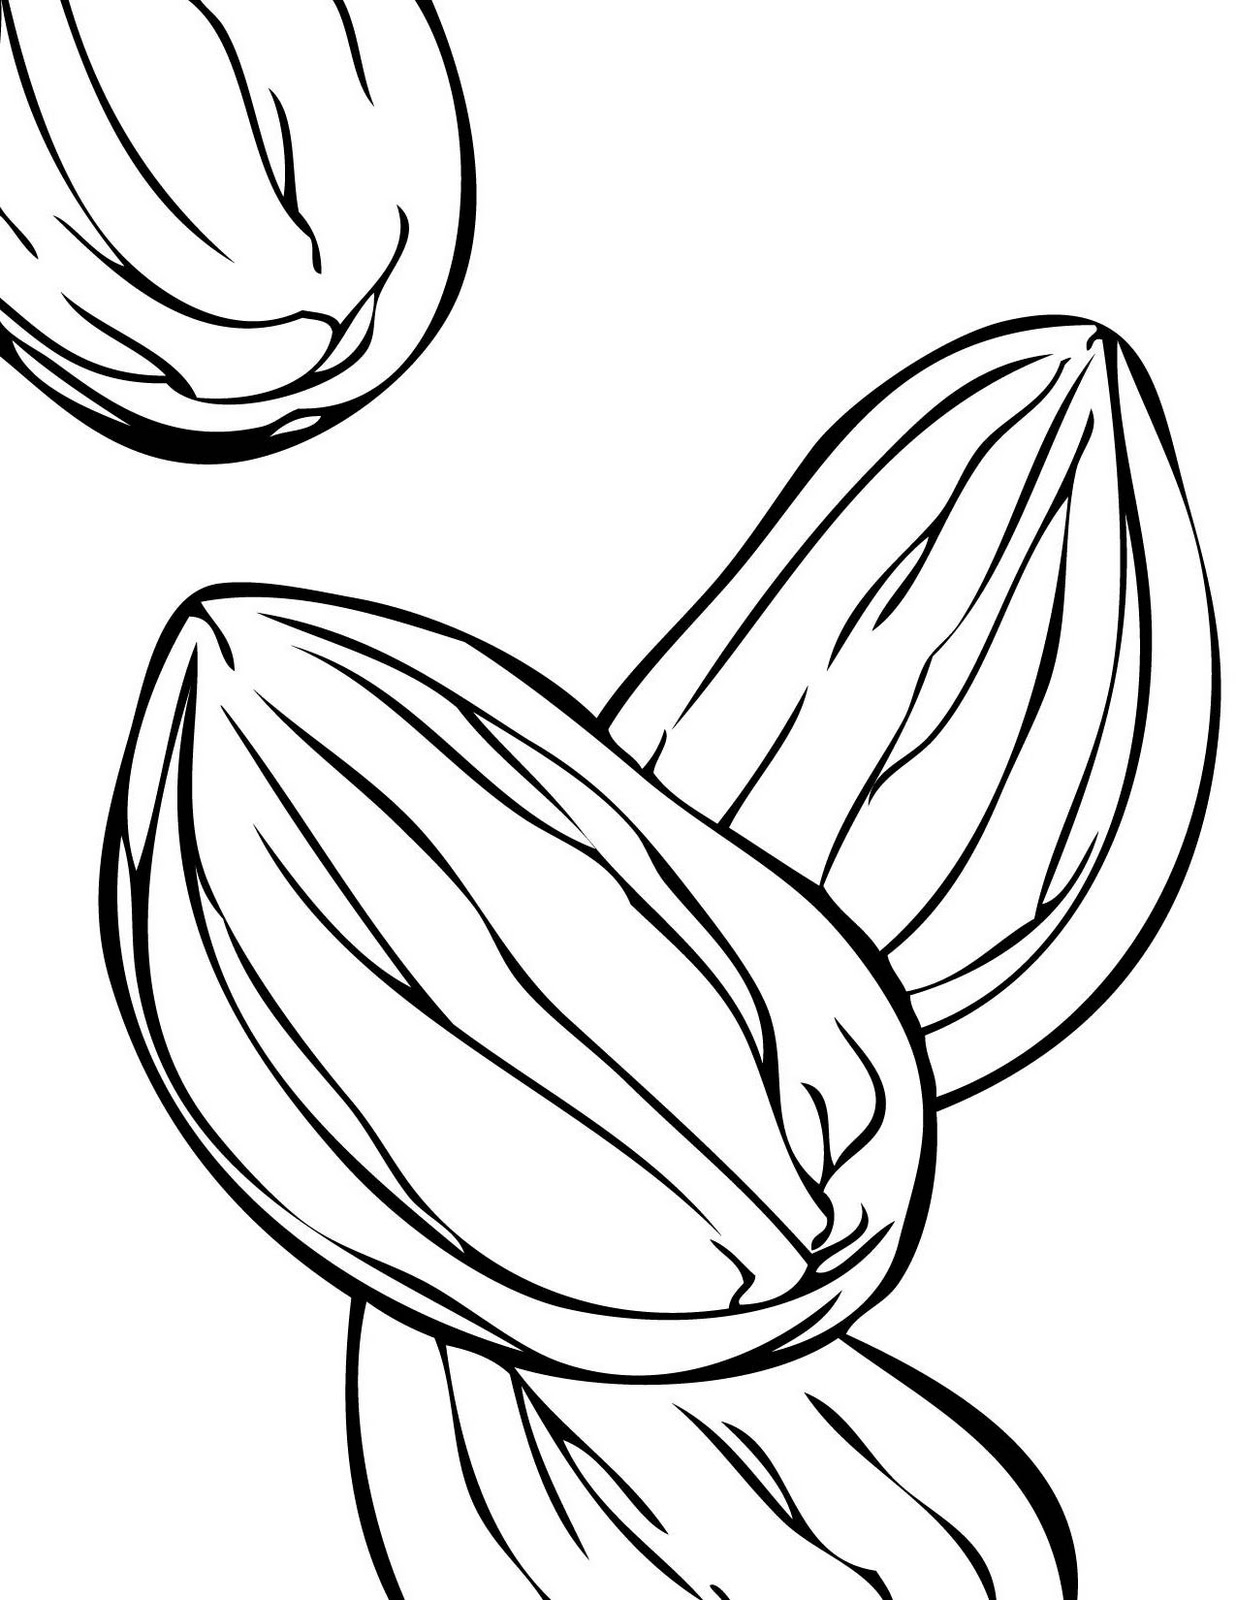 Almond Drawing | Free download on ClipArtMag